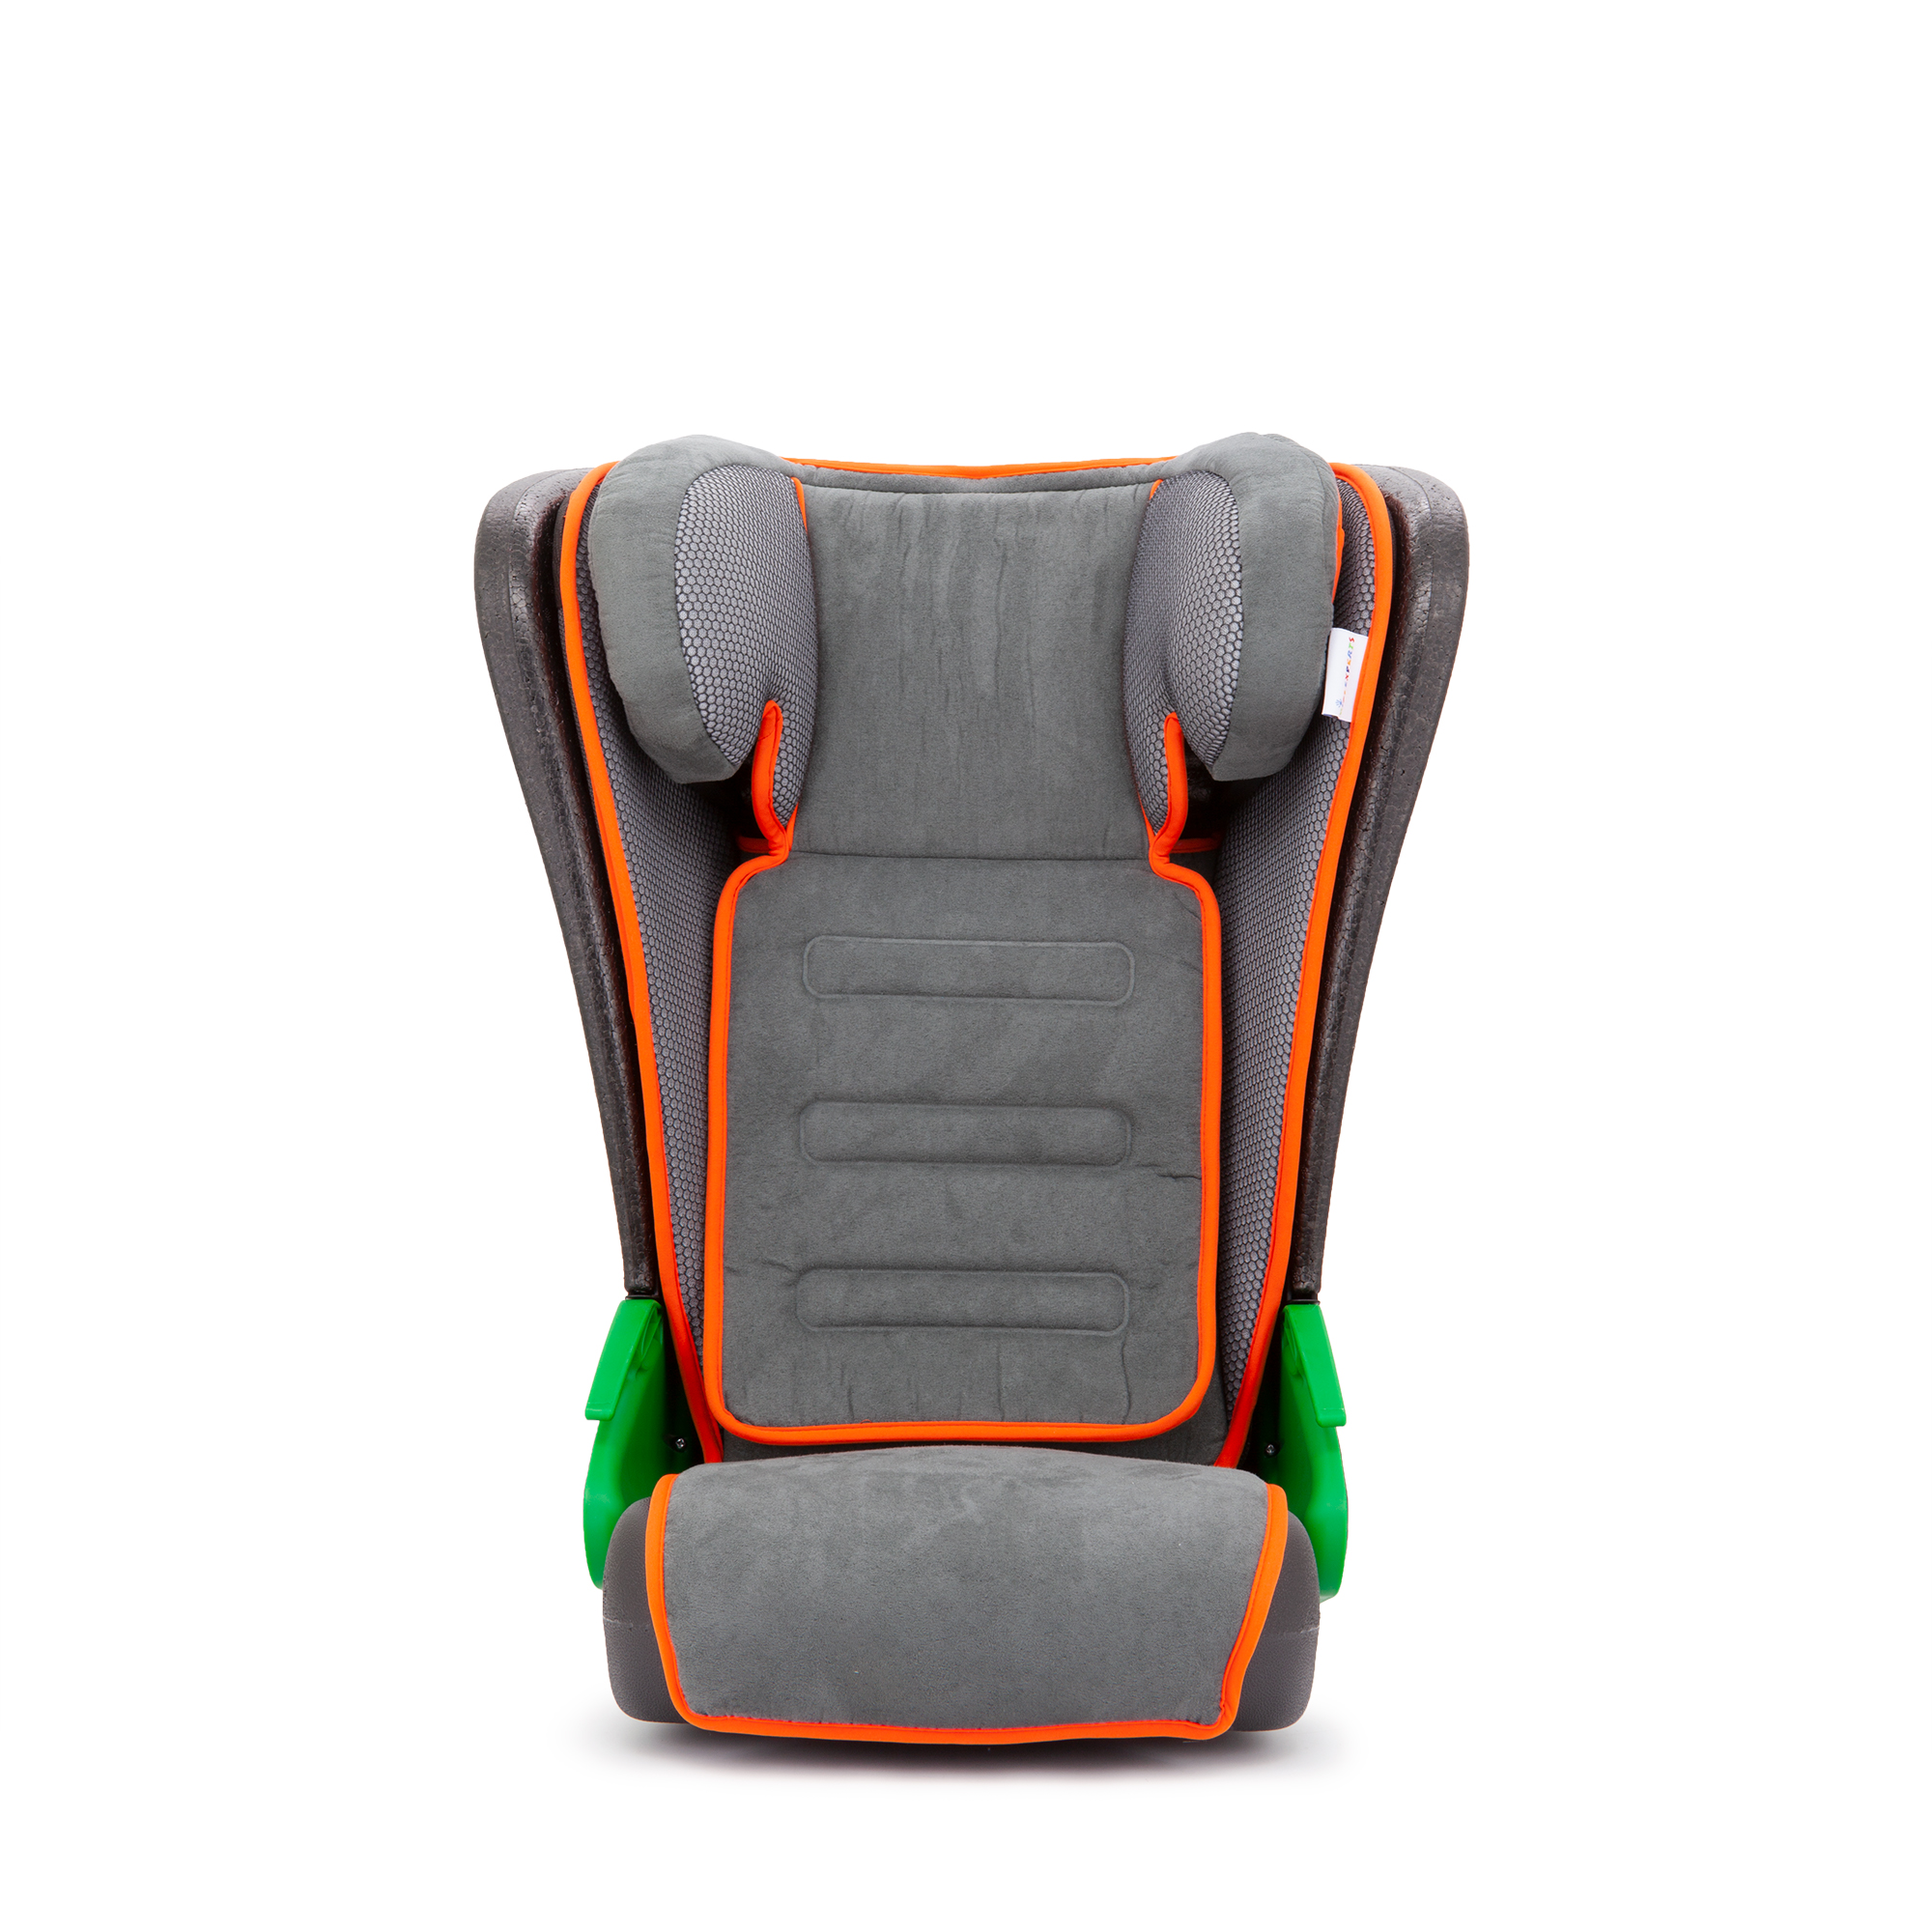 Large Upright Child Car Seat for 3 Year Old